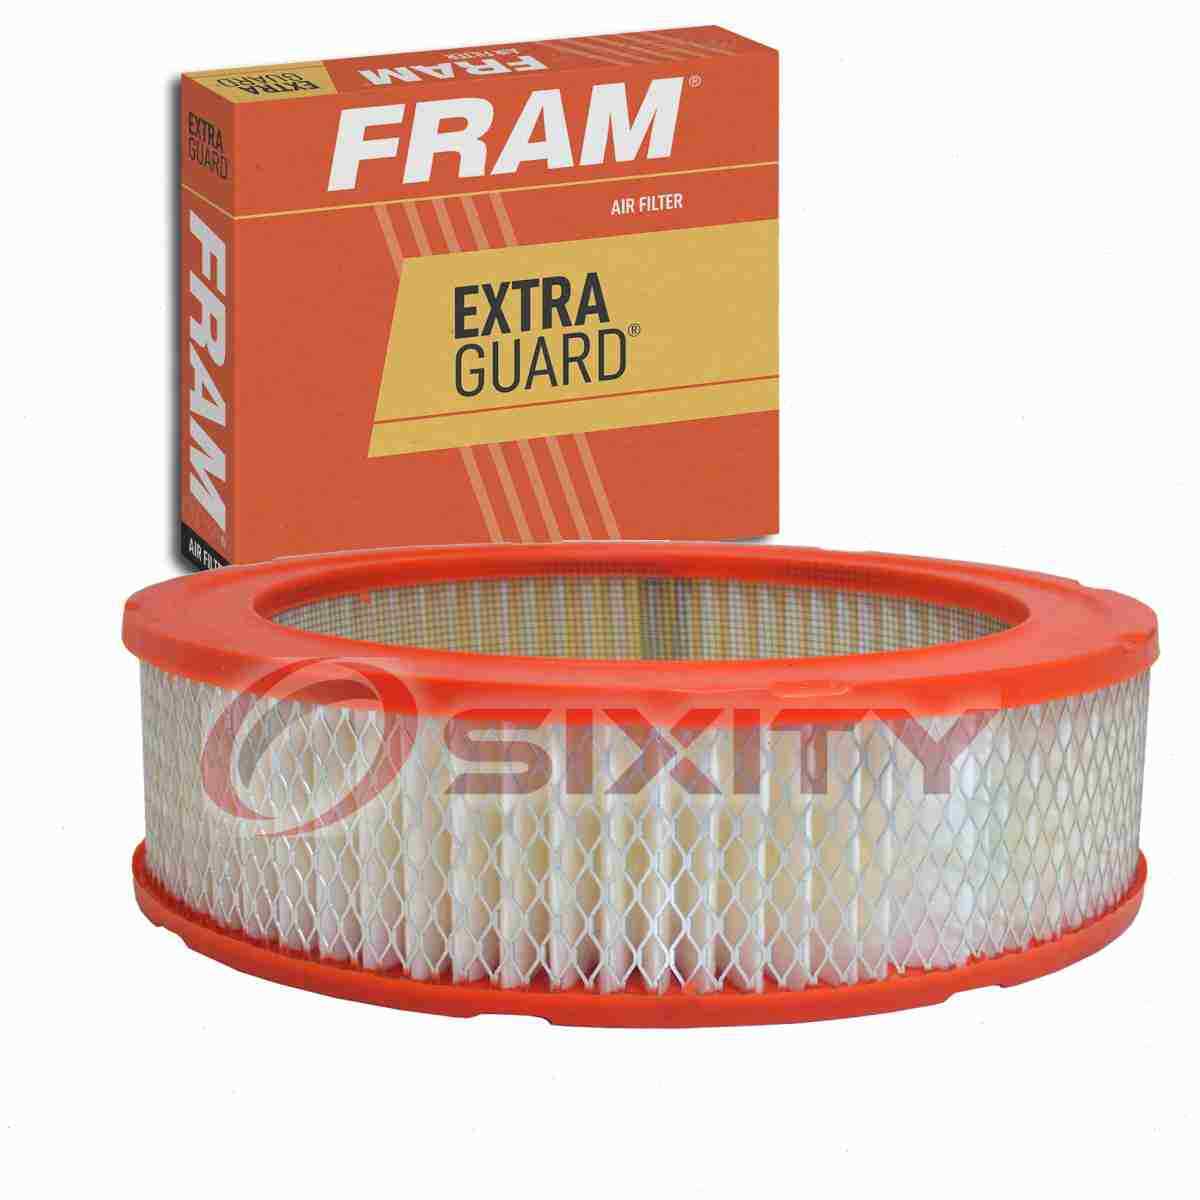 FRAM Extra Guard Air Filter for 1981-1993 Dodge D250 Intake Inlet Manifold mw